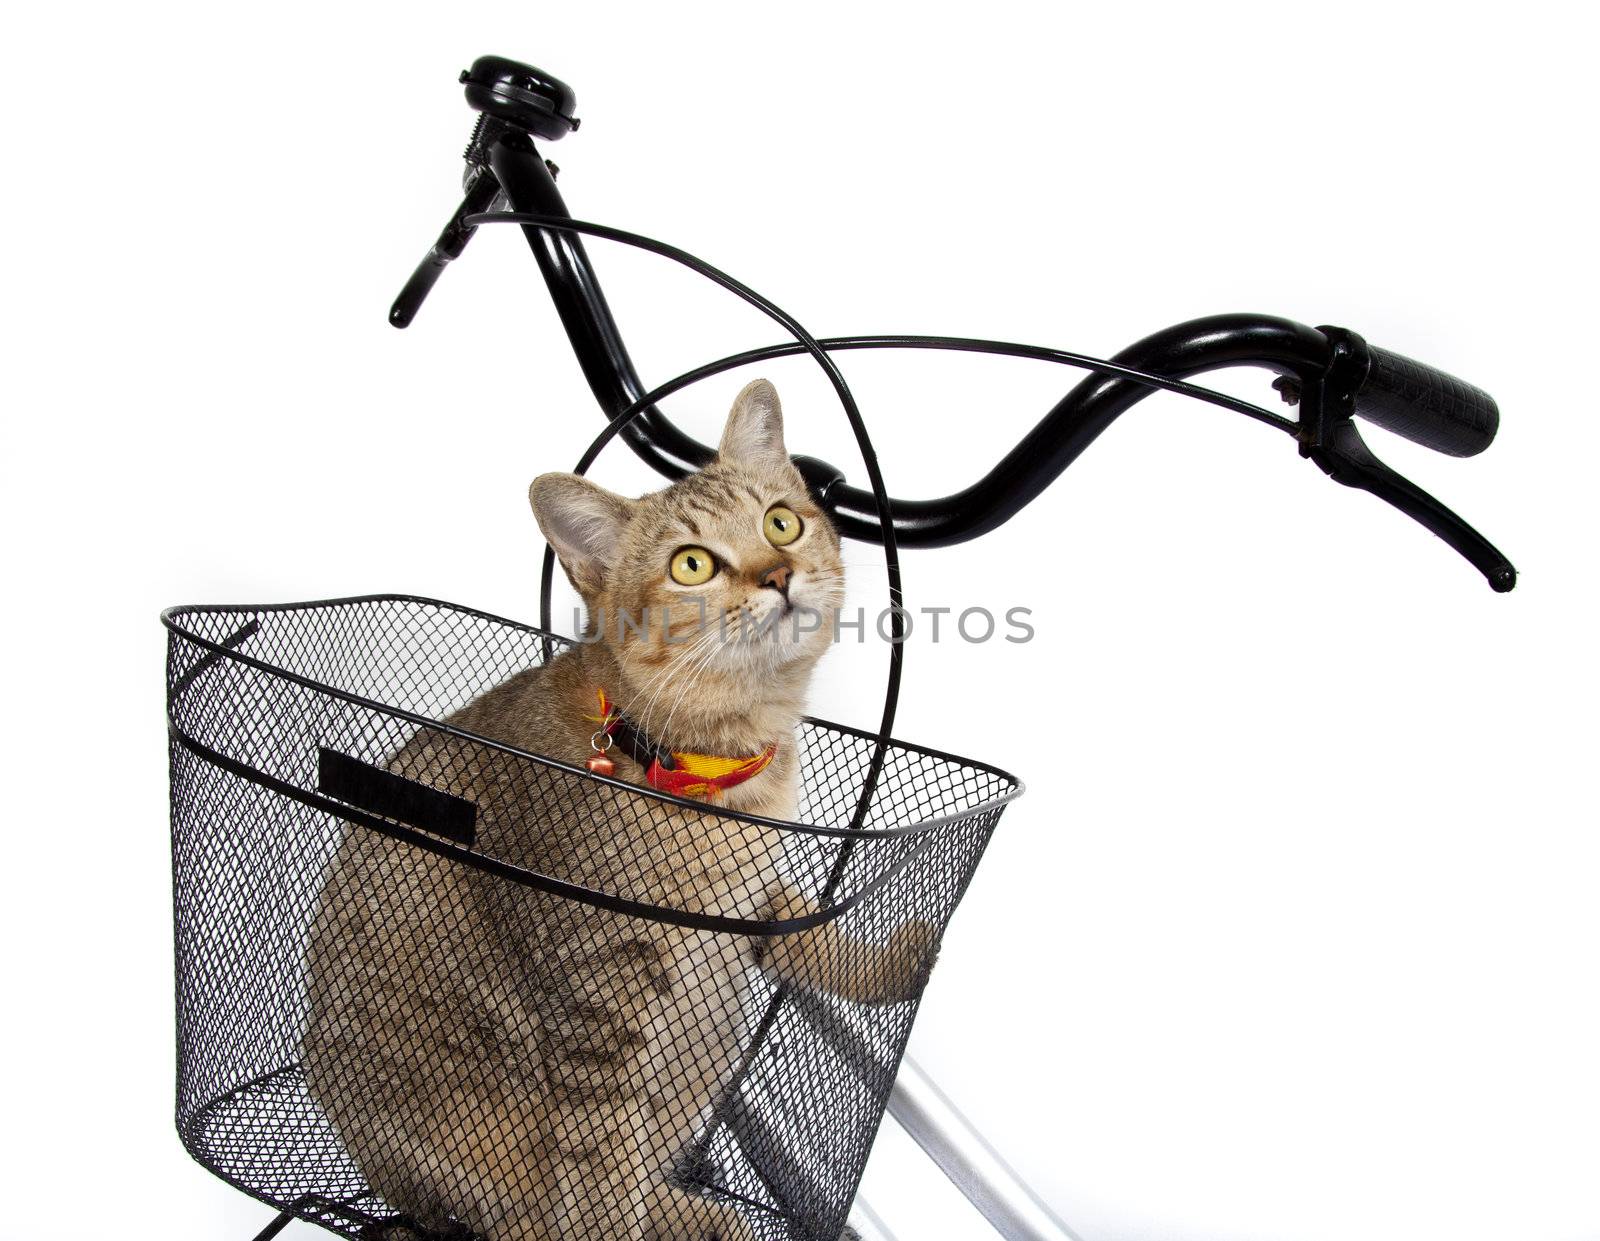 cat sitting in bicycle basket by tpfeller